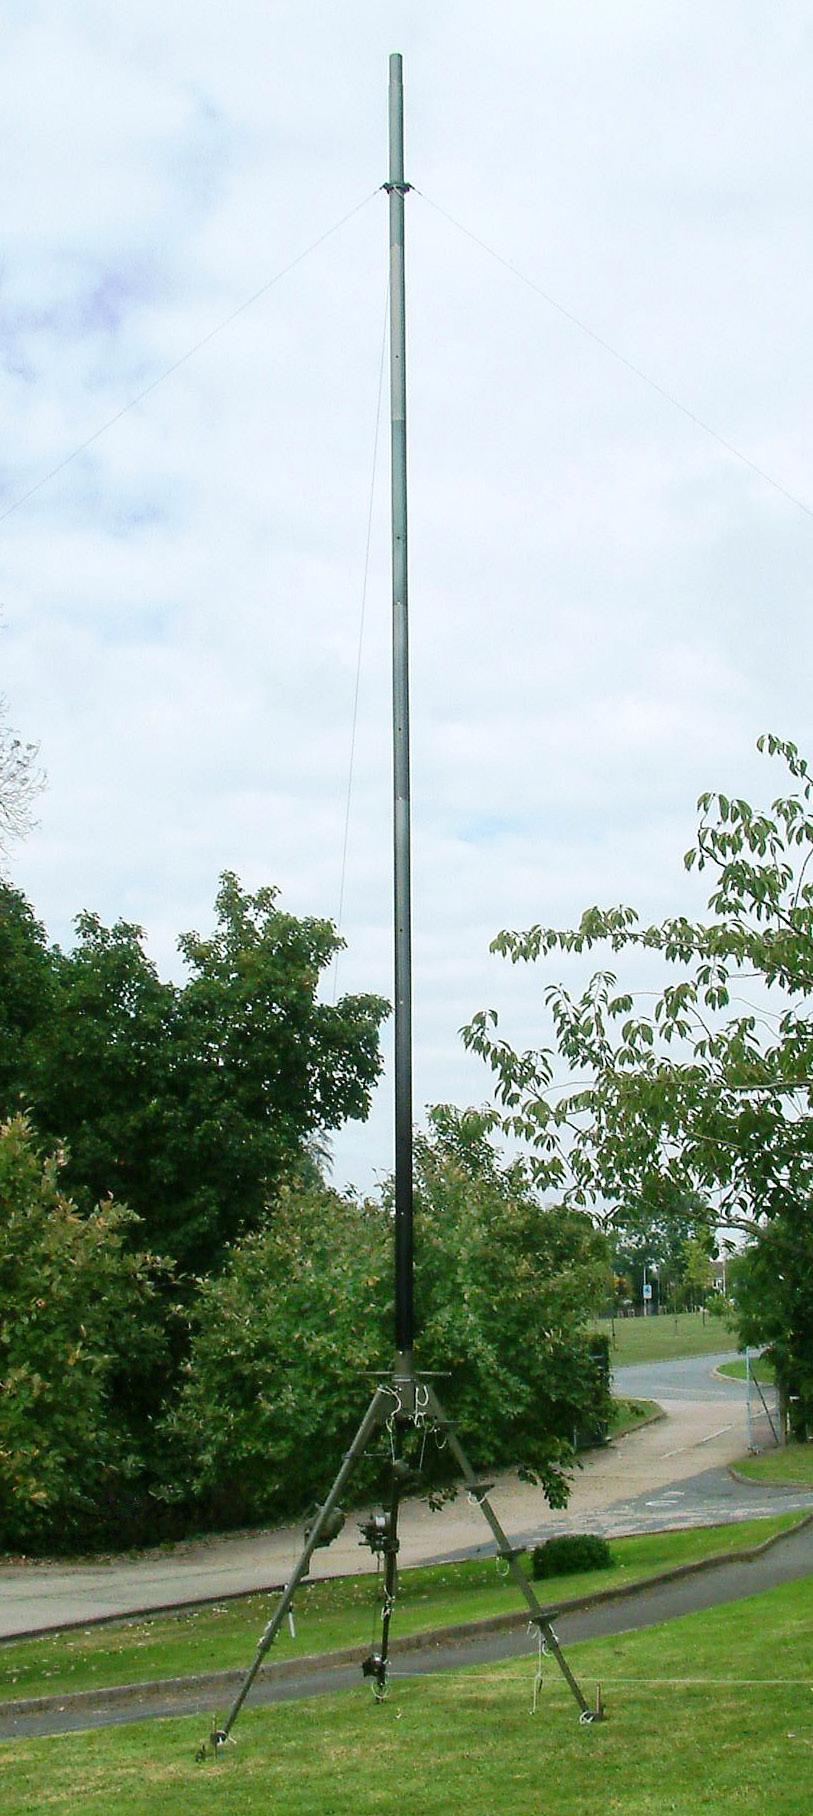 Type 73 Mast System General Description A range of heights up to 30 metres. Headload capacity up to 75 kg. MIL STD 810C Qualified. 4 diameter aircraft grade aluminium mast sections.